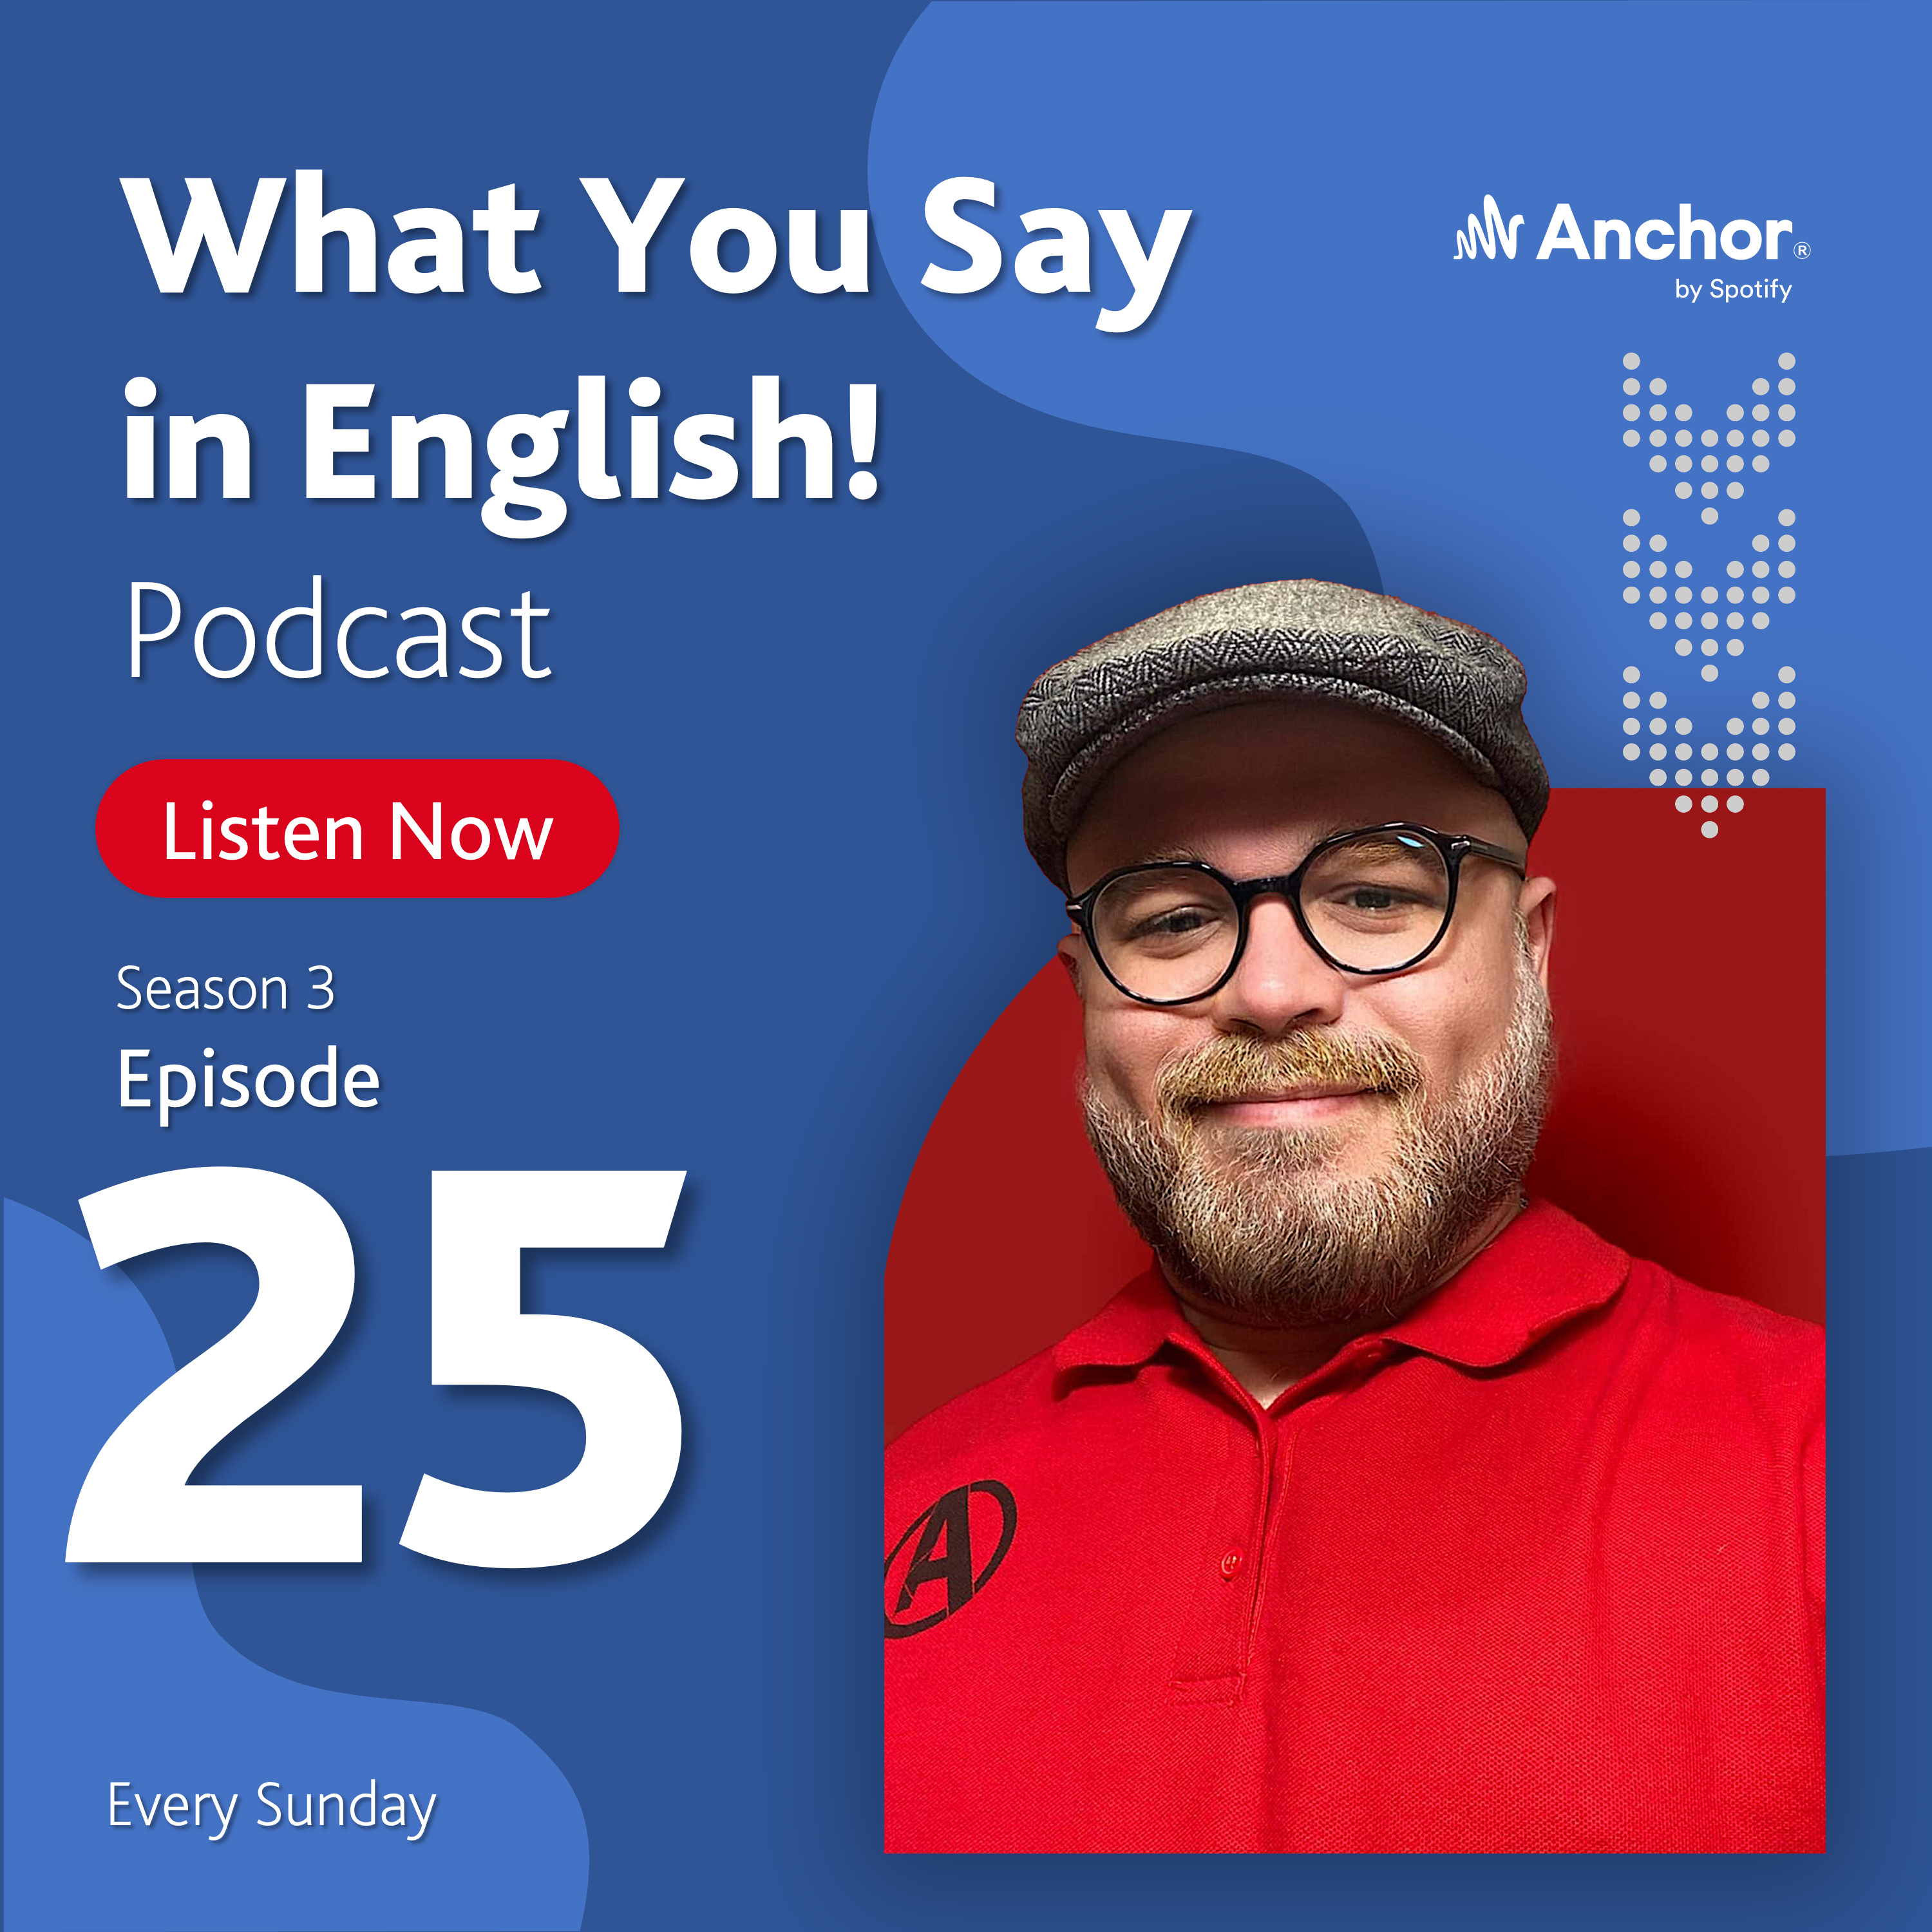 Episode 25: Celebrating The English International Day with an original story